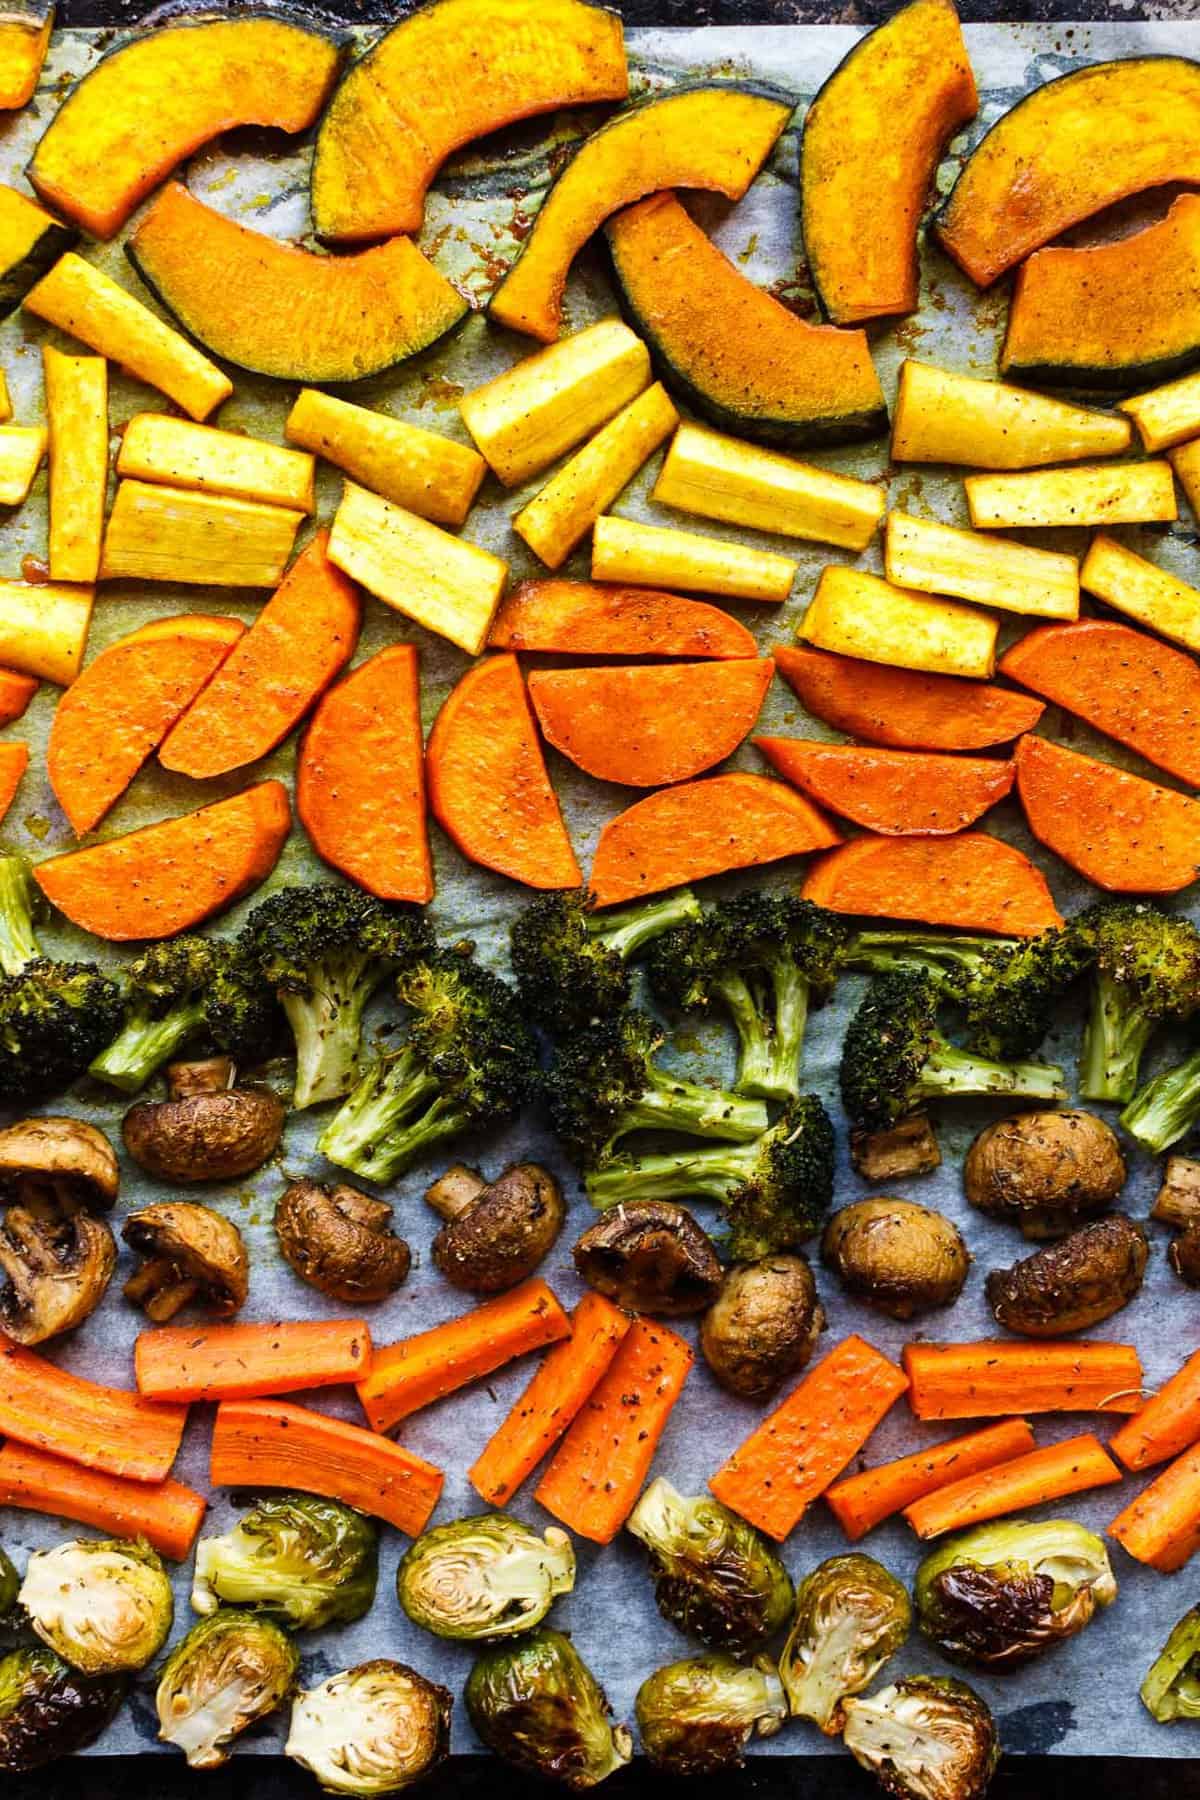 Sweet and savoury roasted vegetables for making Roasted Fall Vegetable Bowls.